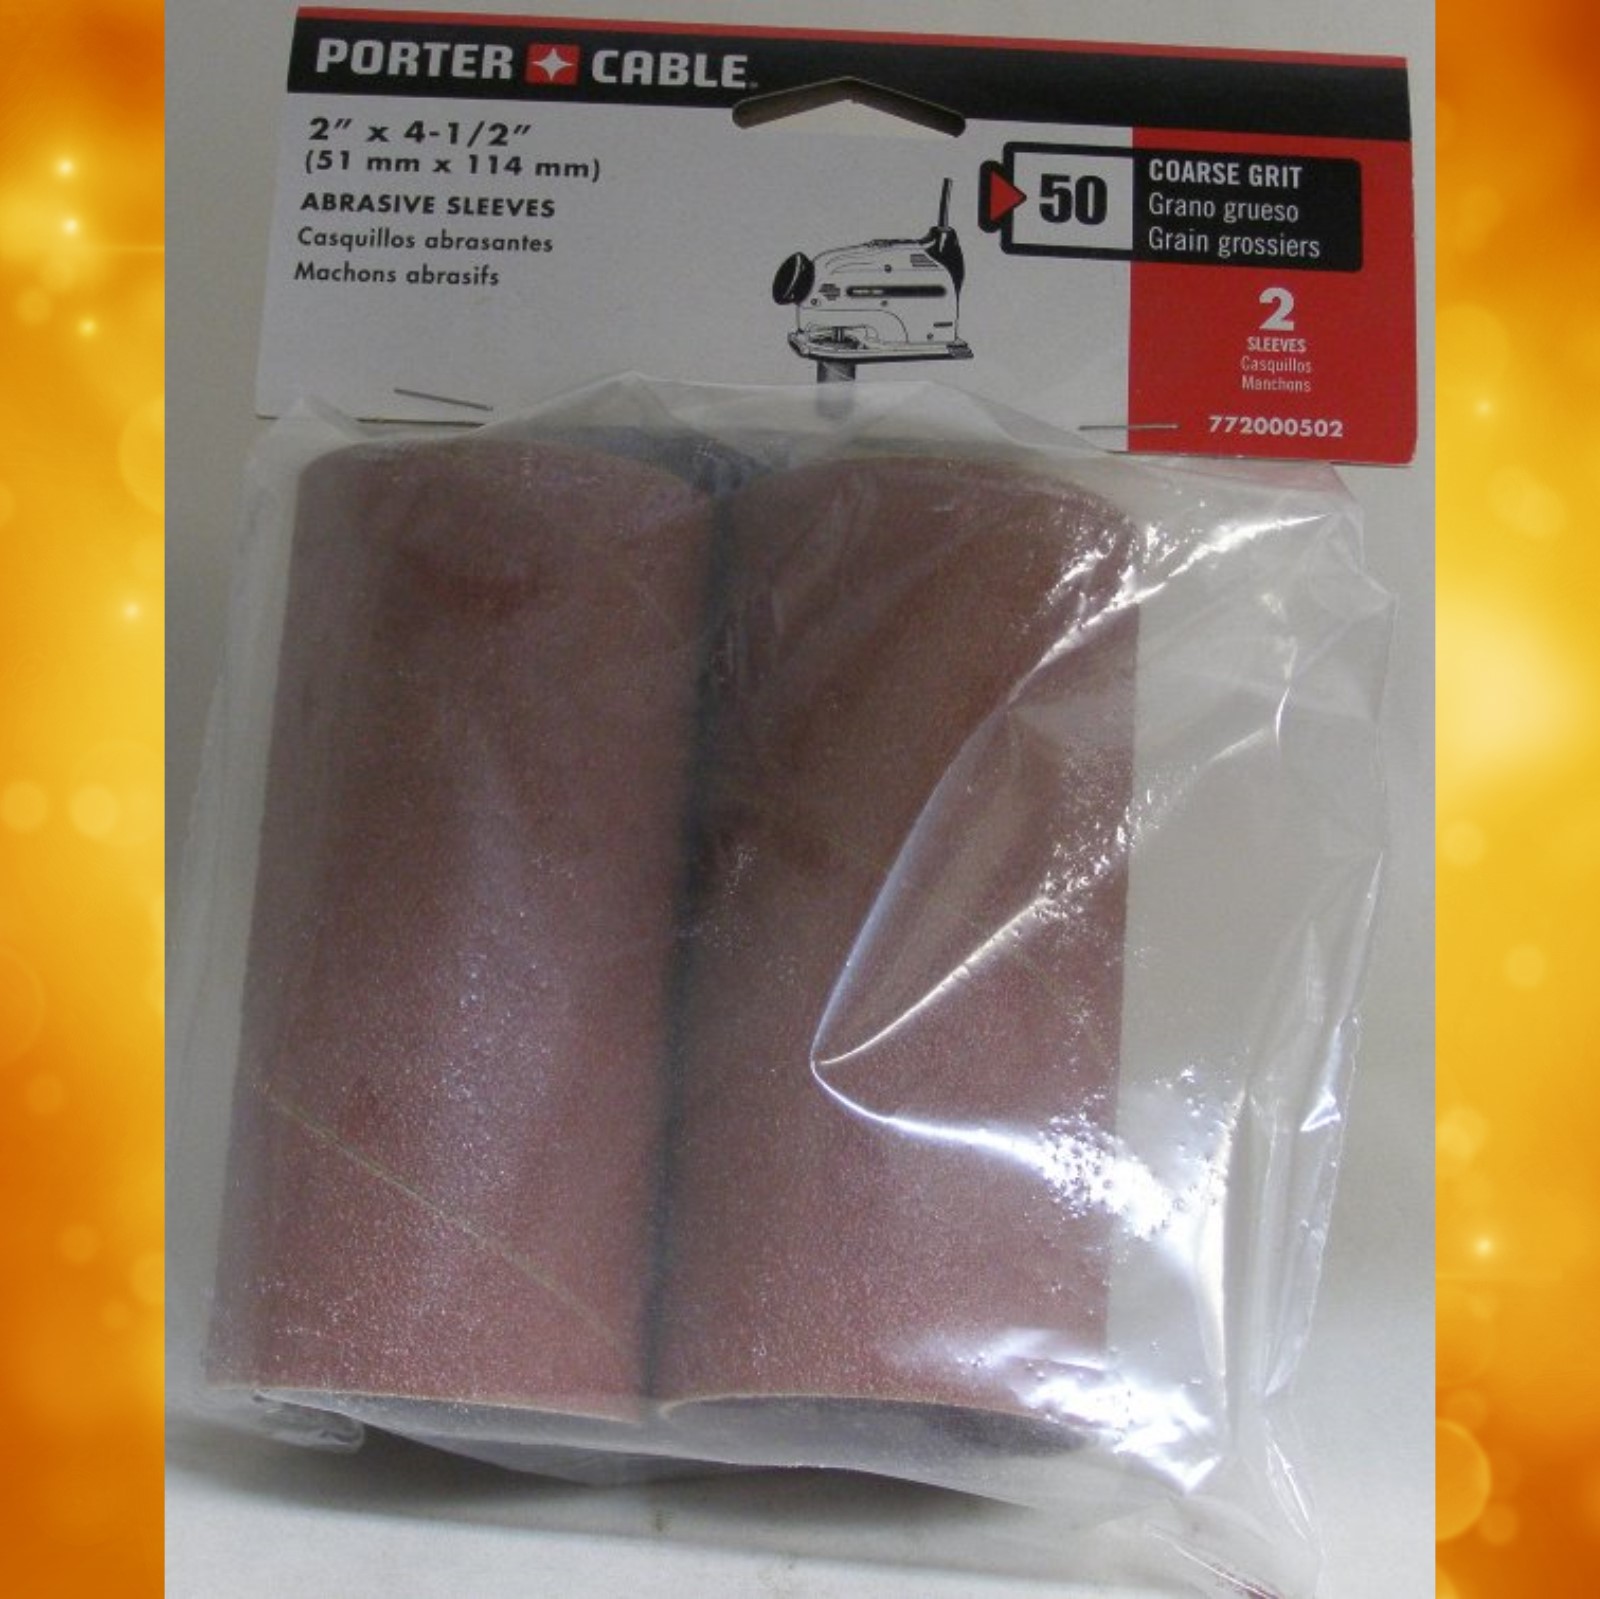 Porter-Cable 2" Drum Spindle Sanding Sleeve - 50 Grit 772000502